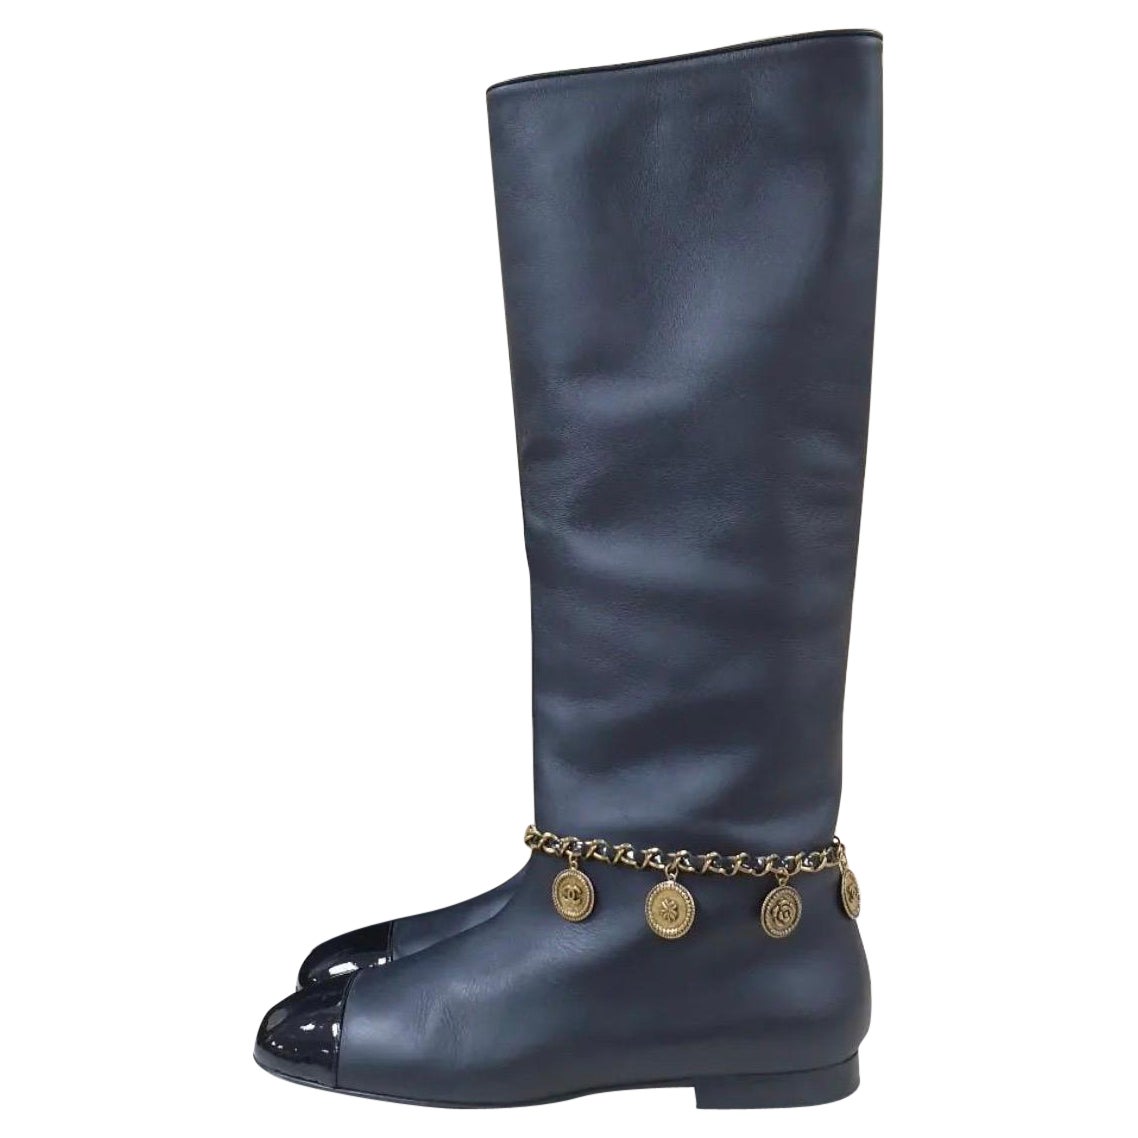 Chanel Boots 8/38 Tall Combat Vintage Black Leather CC Gold Lace